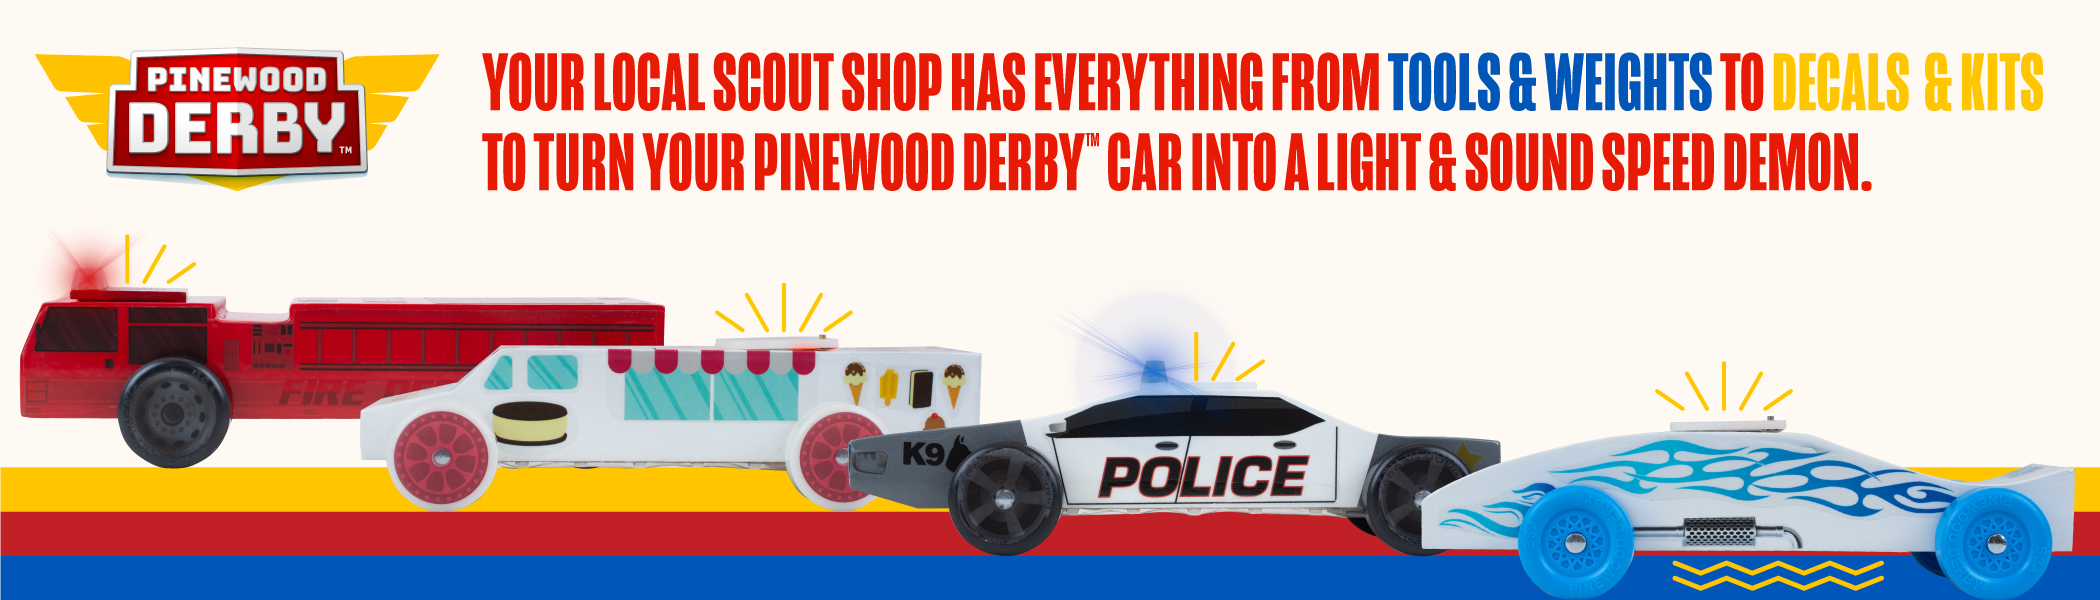 Four pinewood derby cars, decorated as a Fire Truck, Ice Cream Truck, Police Car, and Race Car, all with lights and/or sound effects installed.